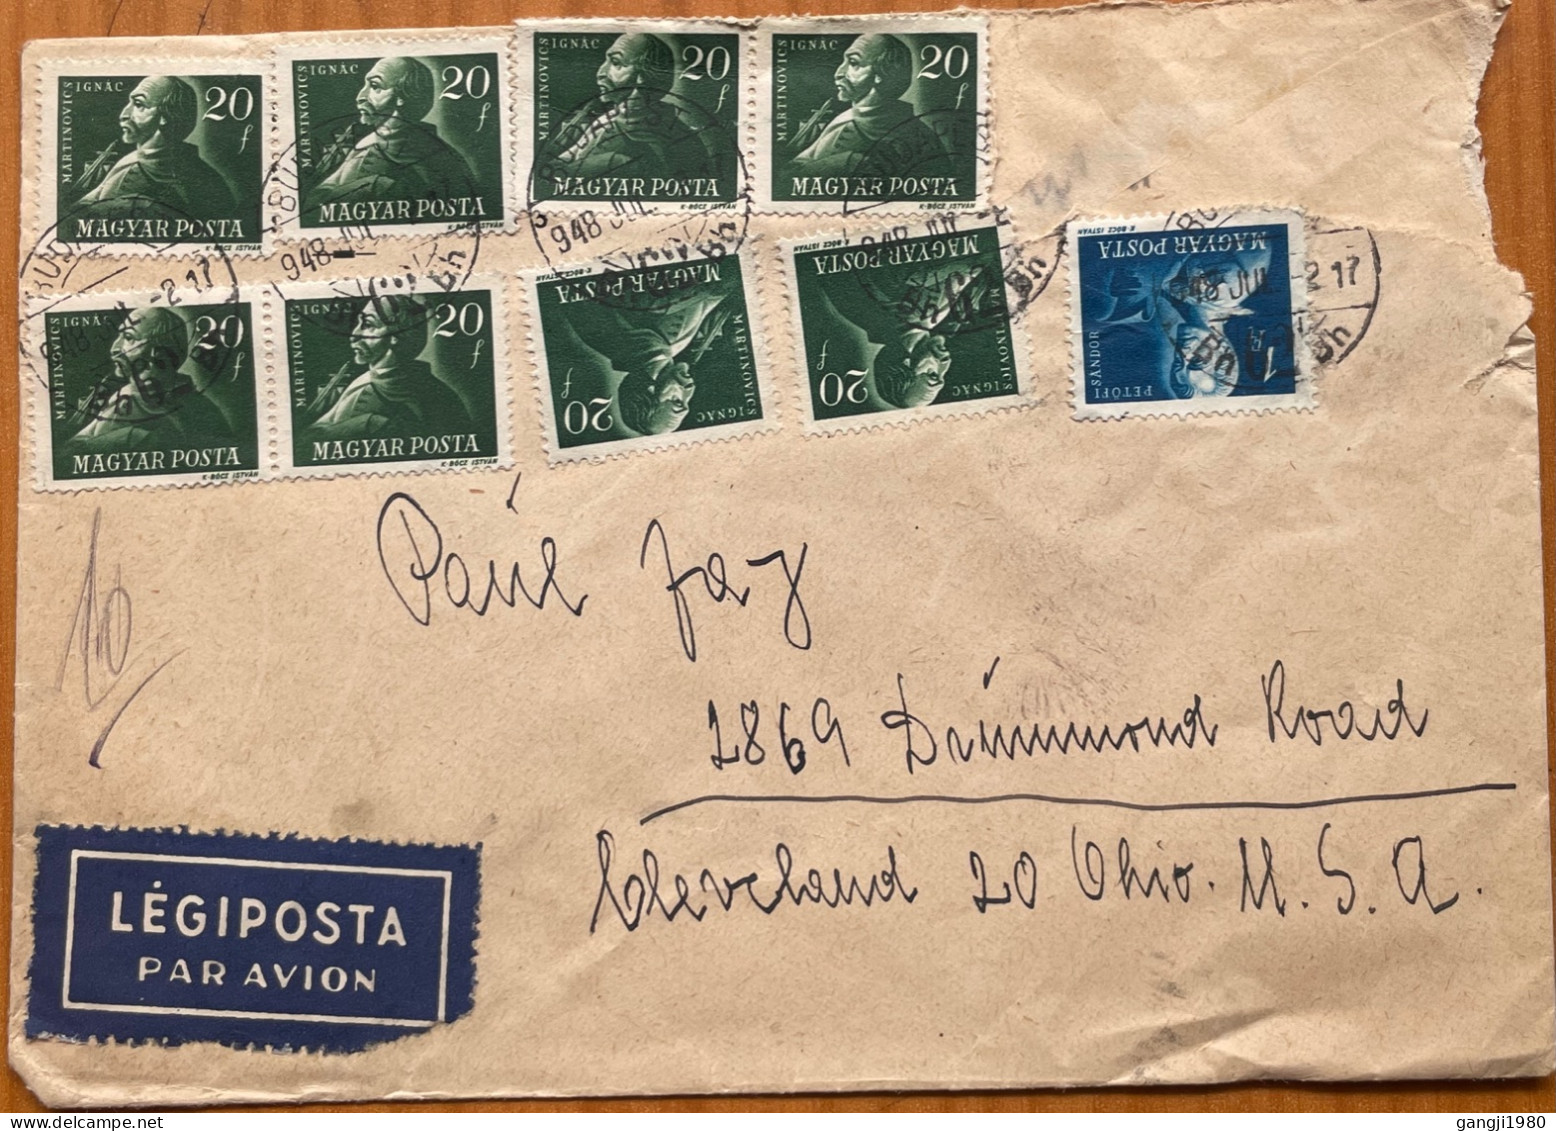 HUNGARY 1948,  TORNED COVER, USED TO USA, 9 MULTI STAMP, WRITER MARTINOVICS. S. PETOFI PORTRAIT, POET, BUDAPEST CITY CAN - Lettres & Documents